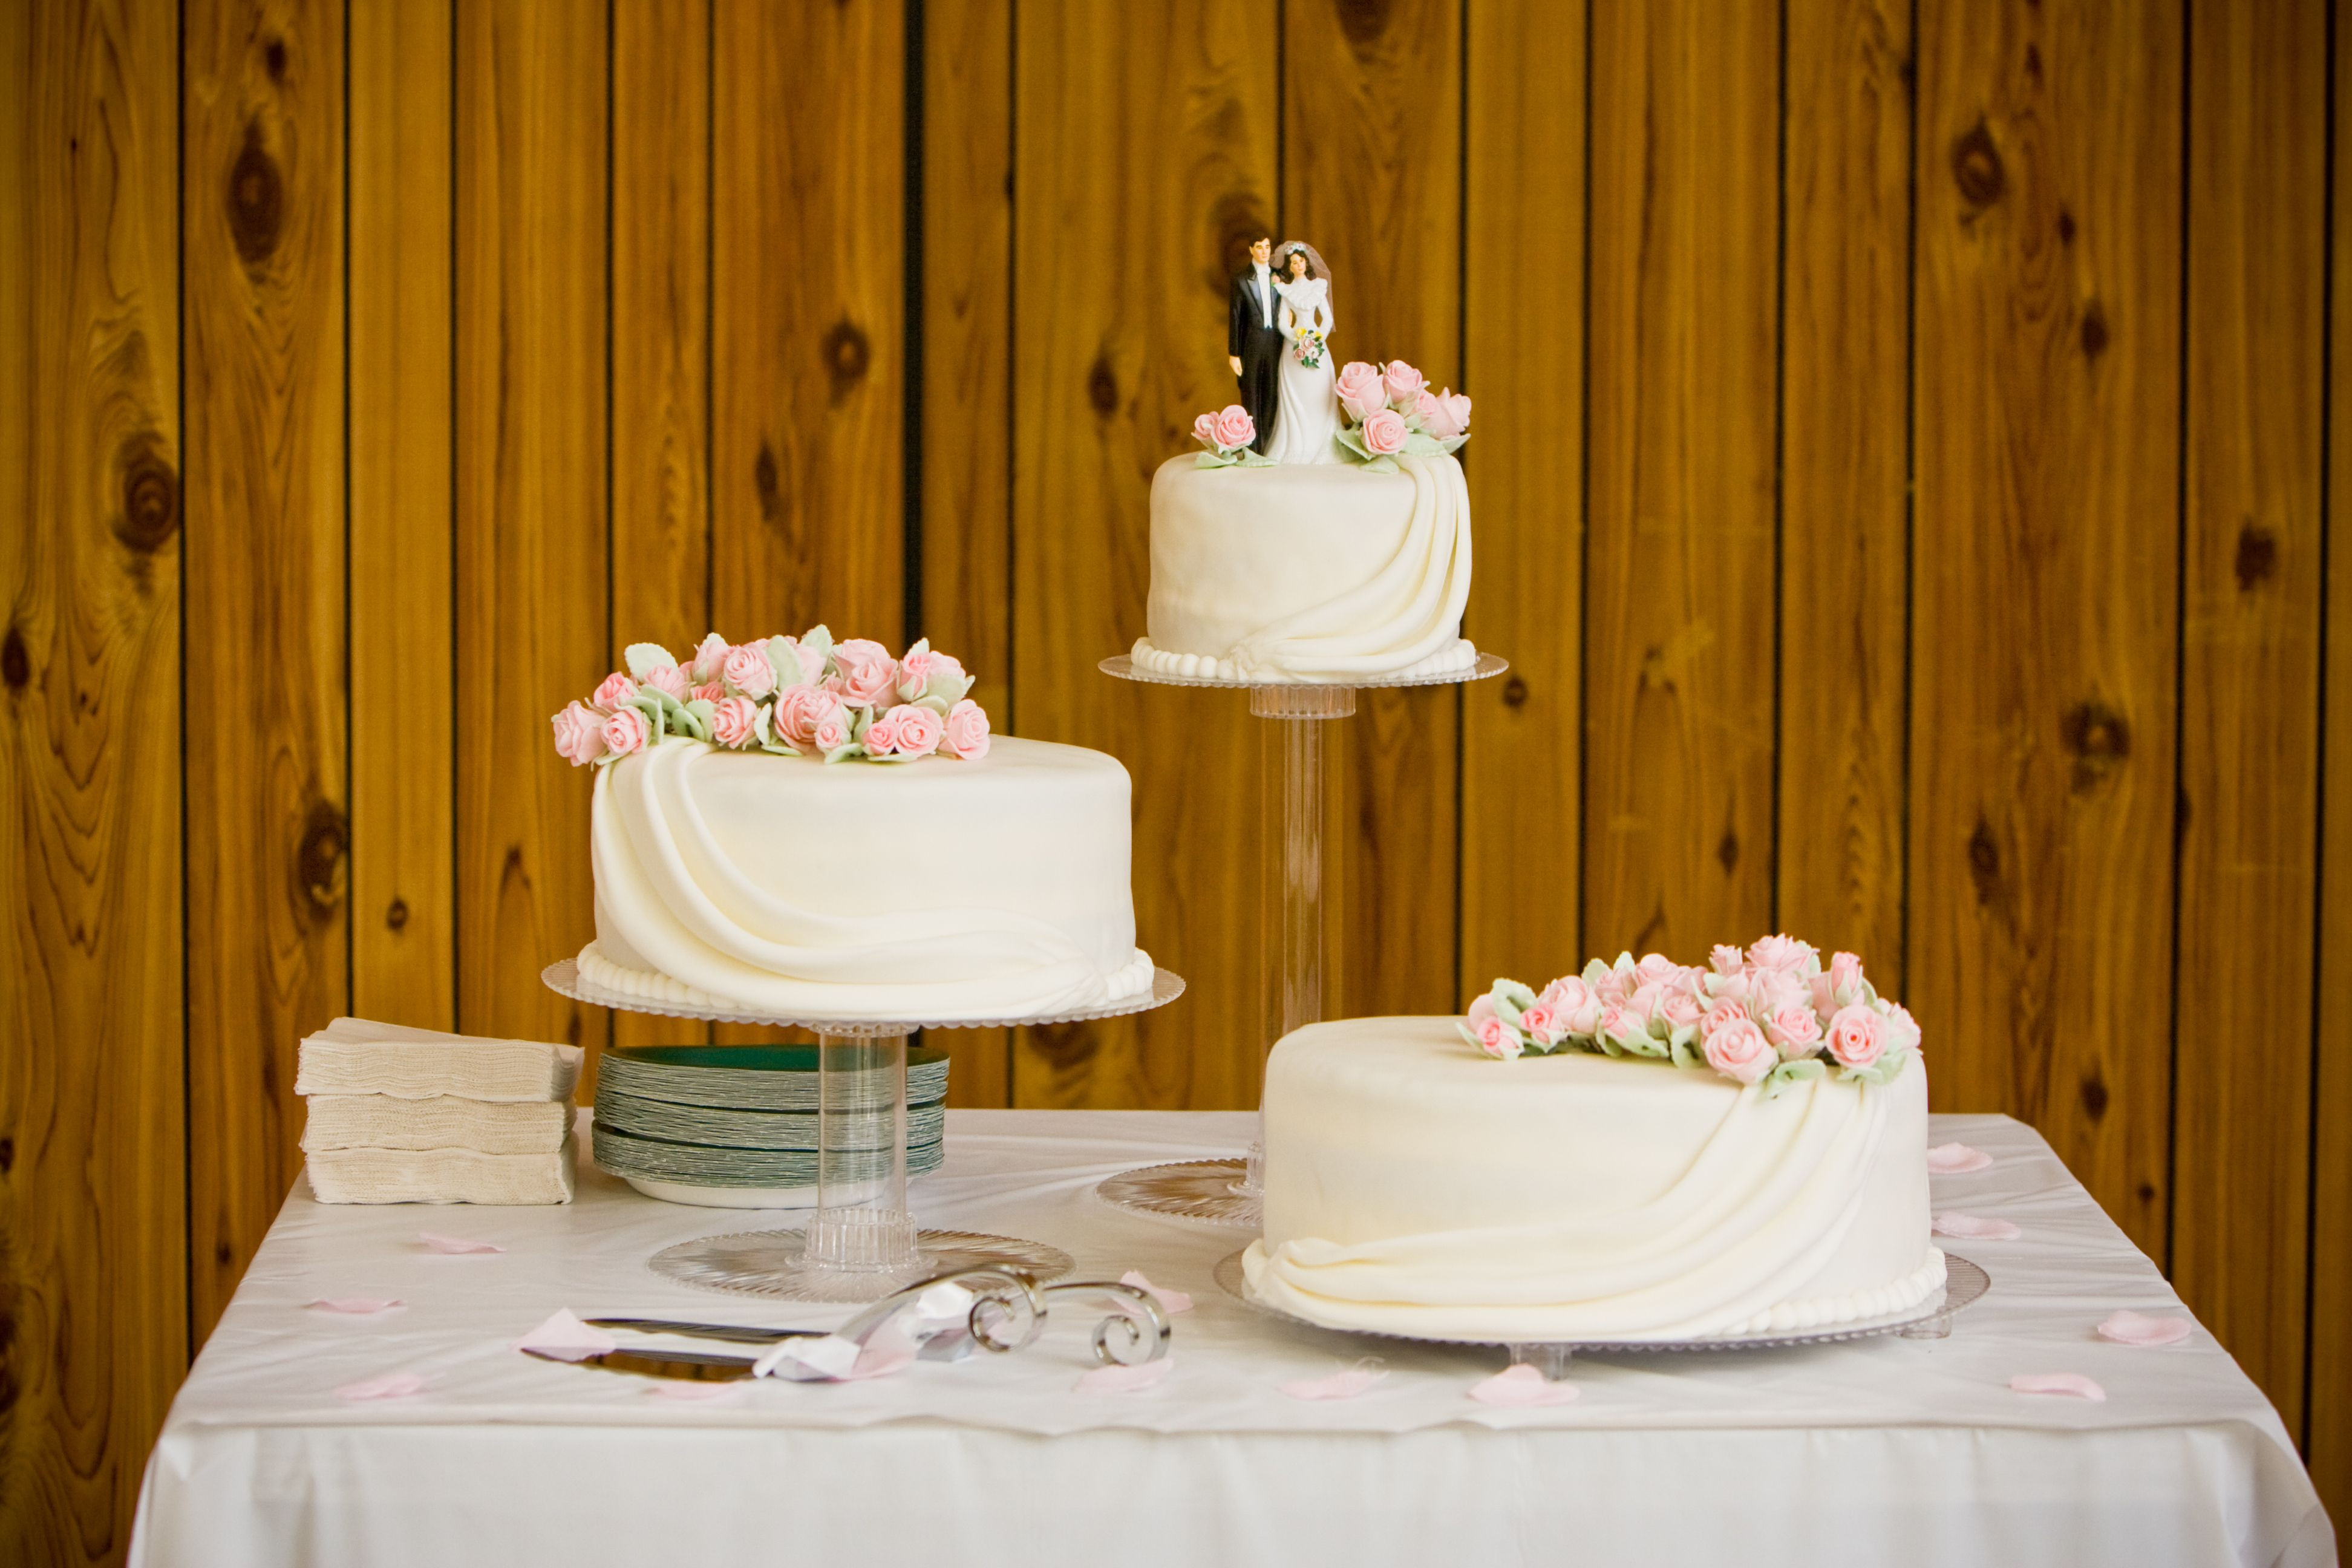 Wedding Cakes Separate Tiers
 wedding cakes with separate tiers